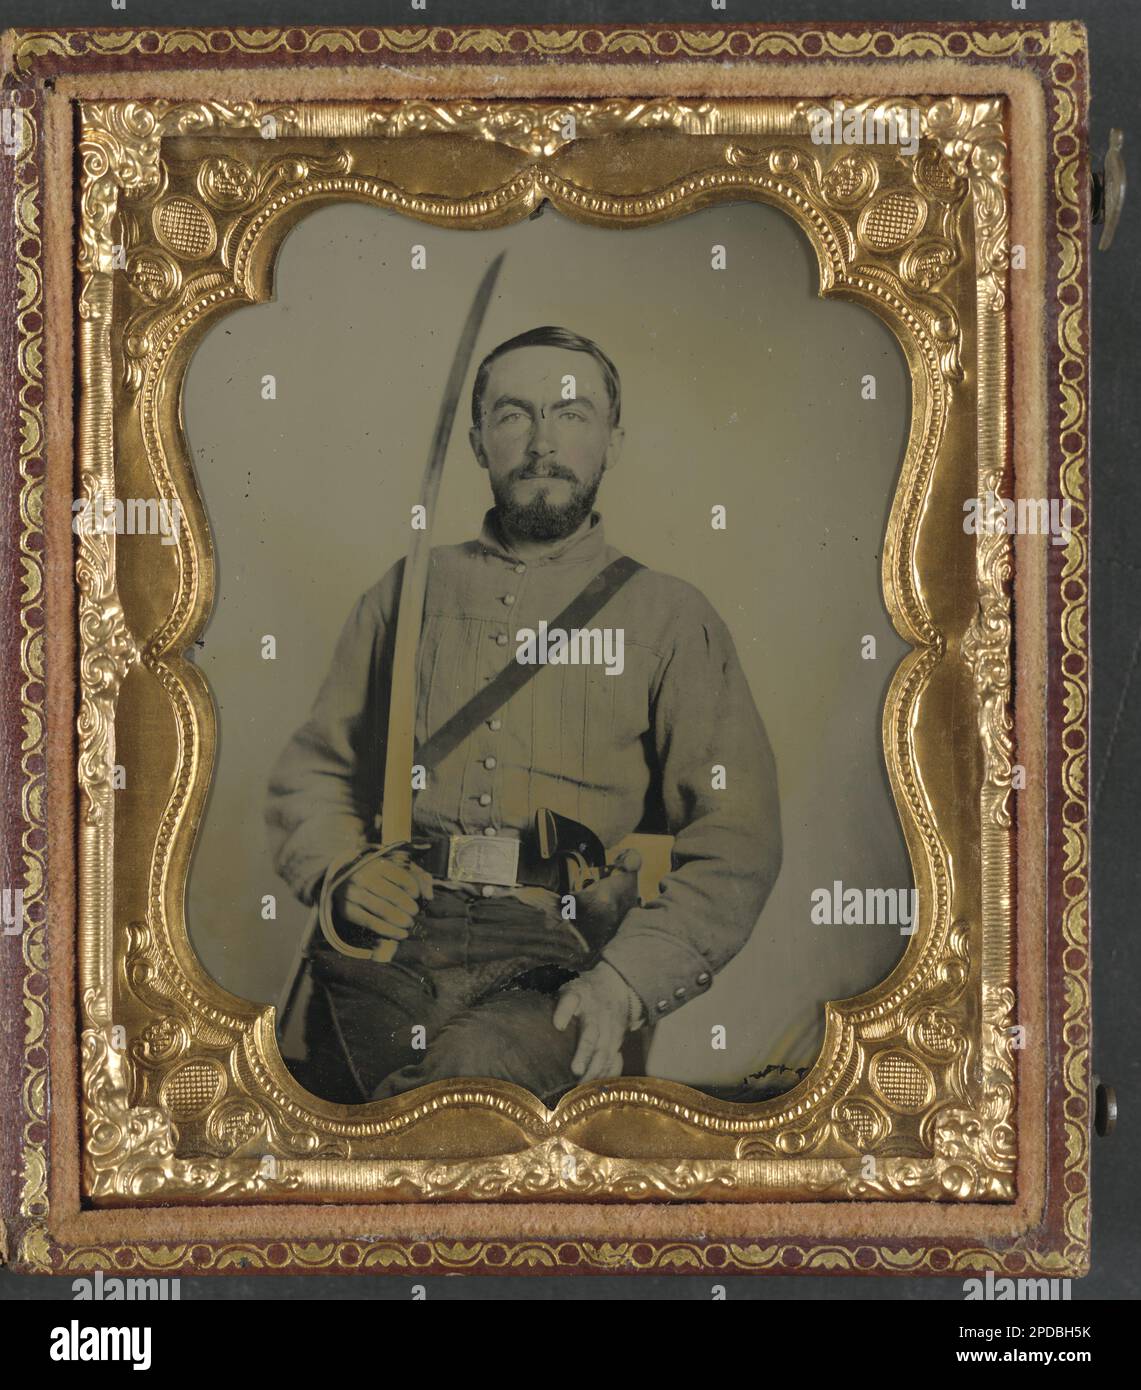 Lieutenant William Bowen Gallaher of Co. E, 1st Virginia Cavalry Regiment in uniform and Virginia state seal belt plate, with revolver and cavalry sword. Liljenquist Family Collection of Civil War Photographs , Published in: Kelbaugh, Ross J. Introduction to Civil War photography. Gettysburg, Pa.: Thomas Publications, 1991, p. 16, Published in: Driver, Robert J. 1st Virginia Cavalry. Lynchburg, Va. : H. E. Howard, 1991, p. 134, pp/liljconfed. Gallaher, William Bowen, 1840-1911, Confederate States of America, Army, People, 1860-1870, Soldiers, Confederate, 1860-1870, Military uniforms, Confeder Stock Photo